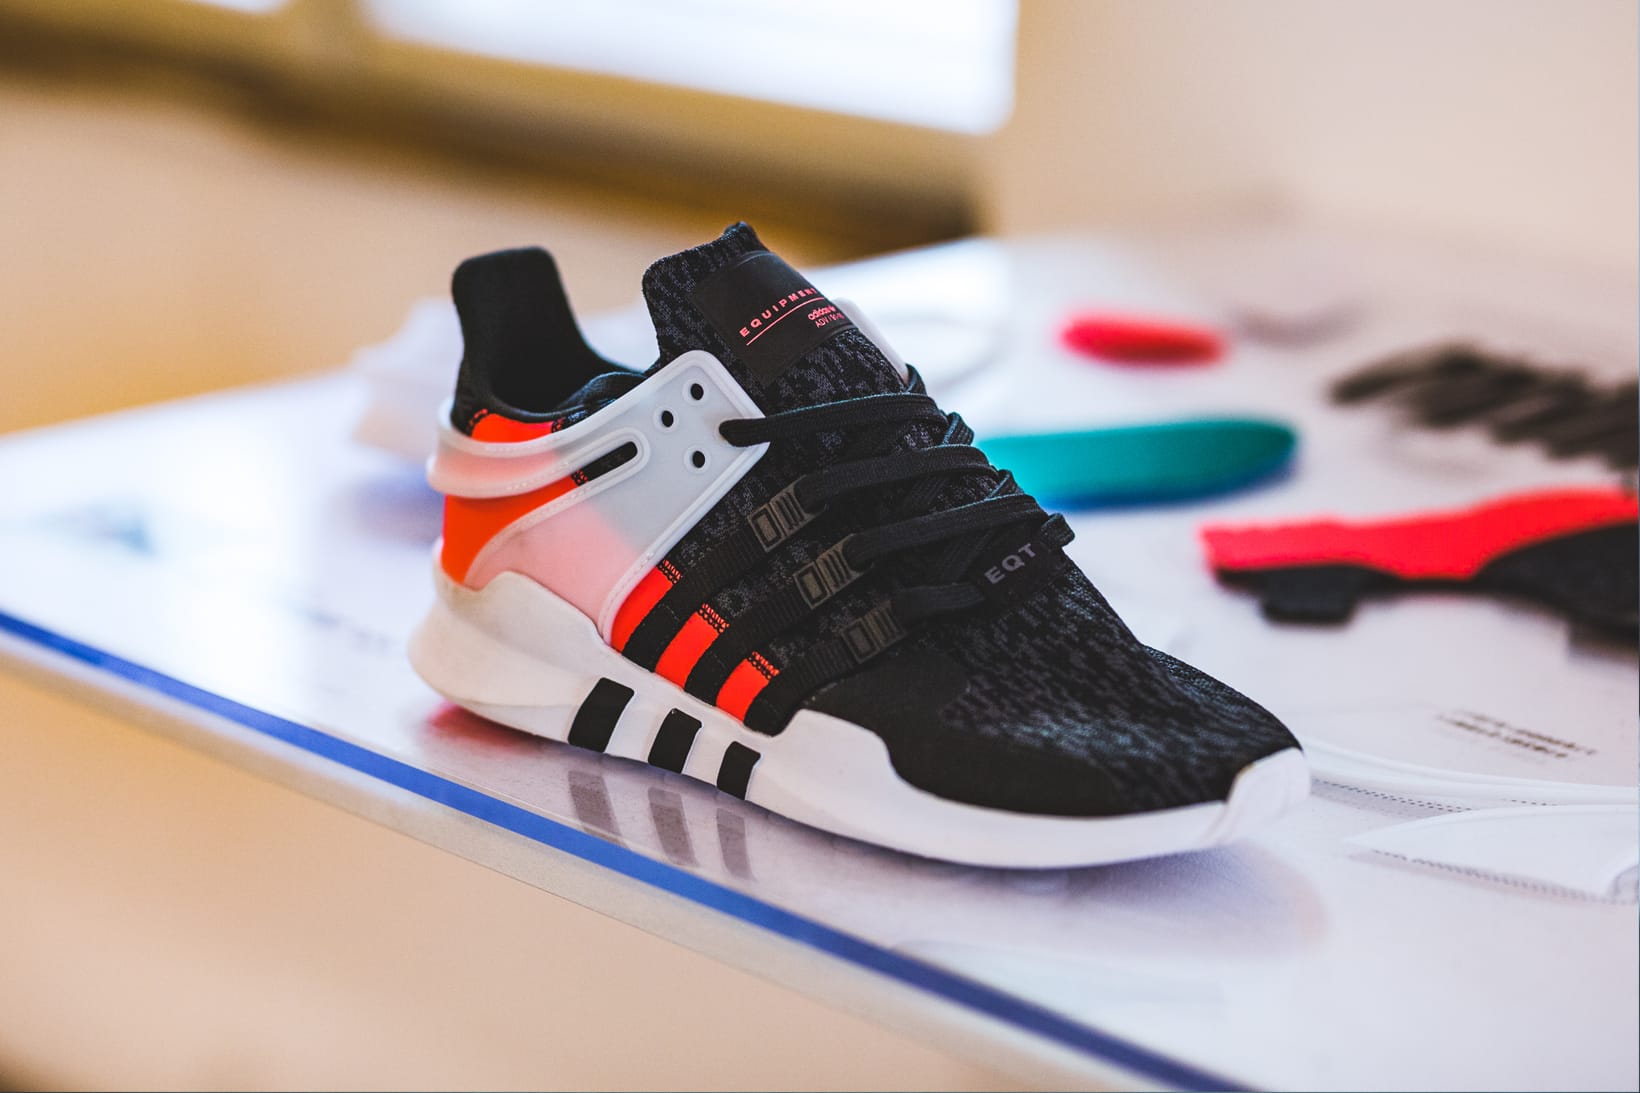 what does adidas eqt stand for